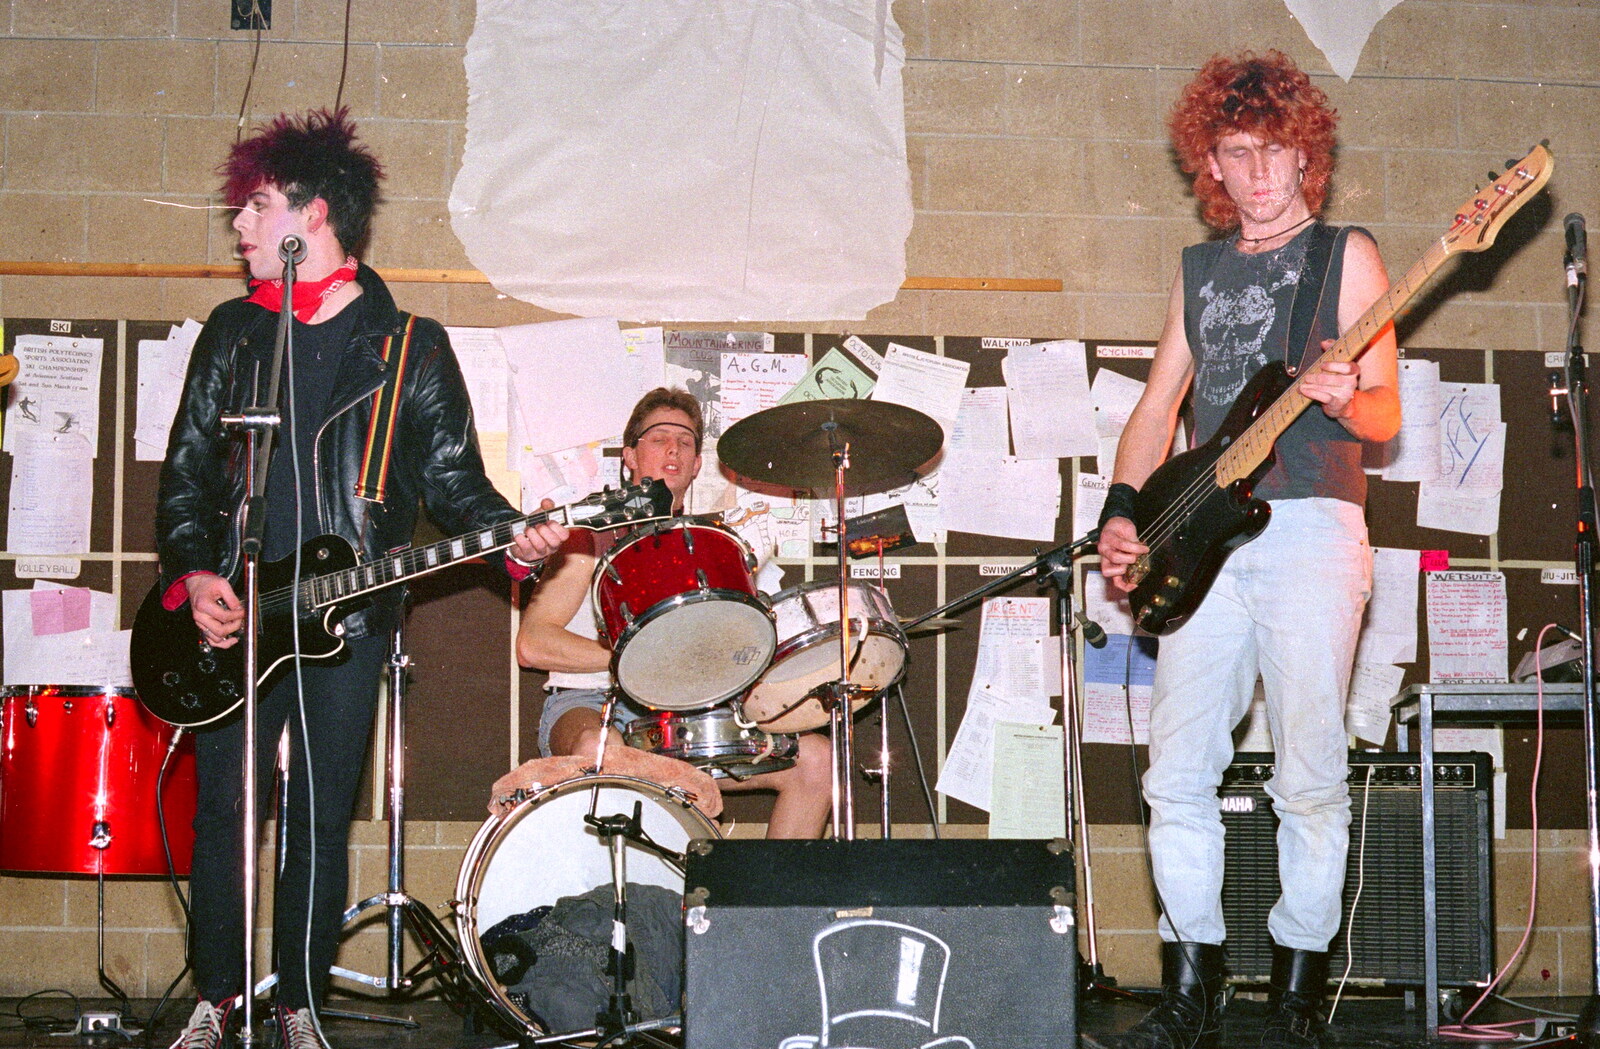 A punk band on stage from Uni: The PPSU "Jazz" RAG Review and Charity Auction, Plymouth, Devon - 19th February 1986